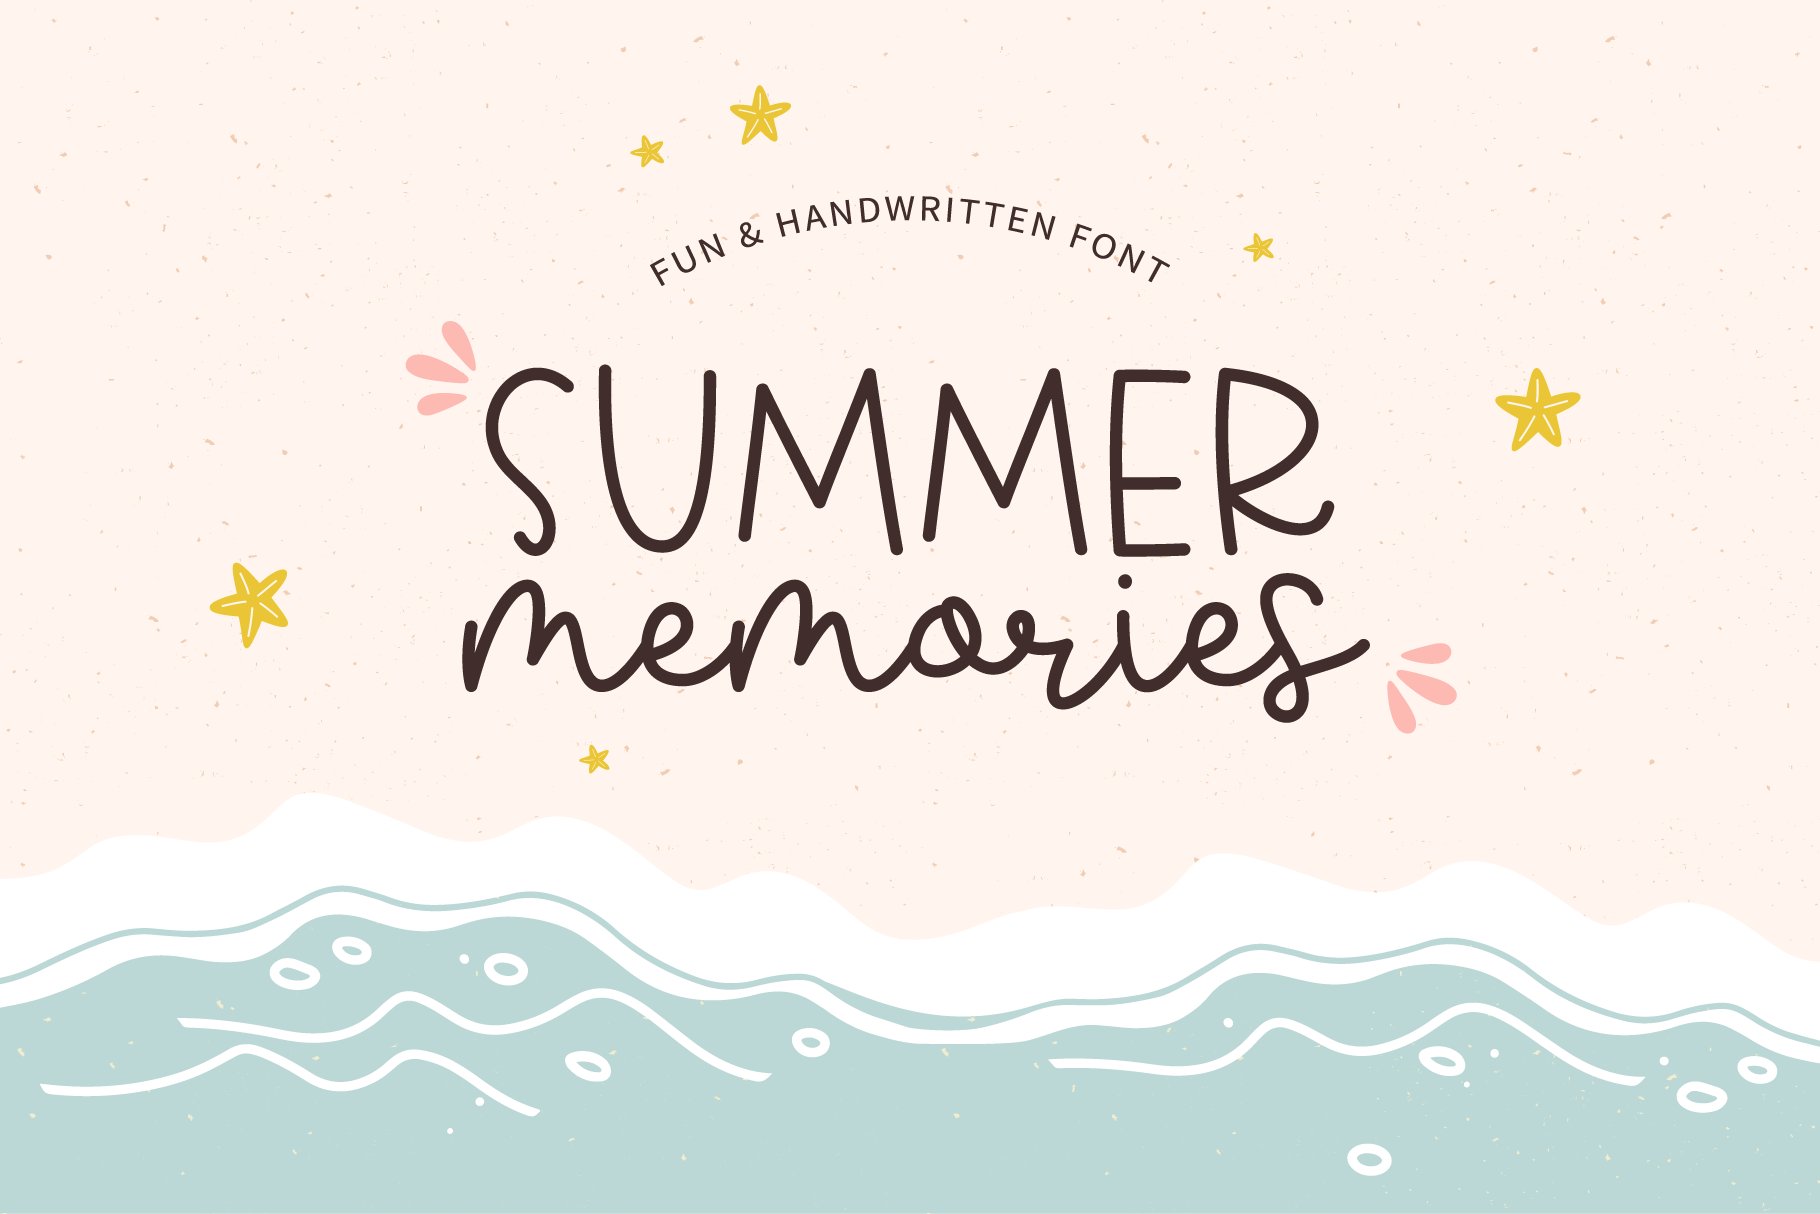 Summer Memories cover image.